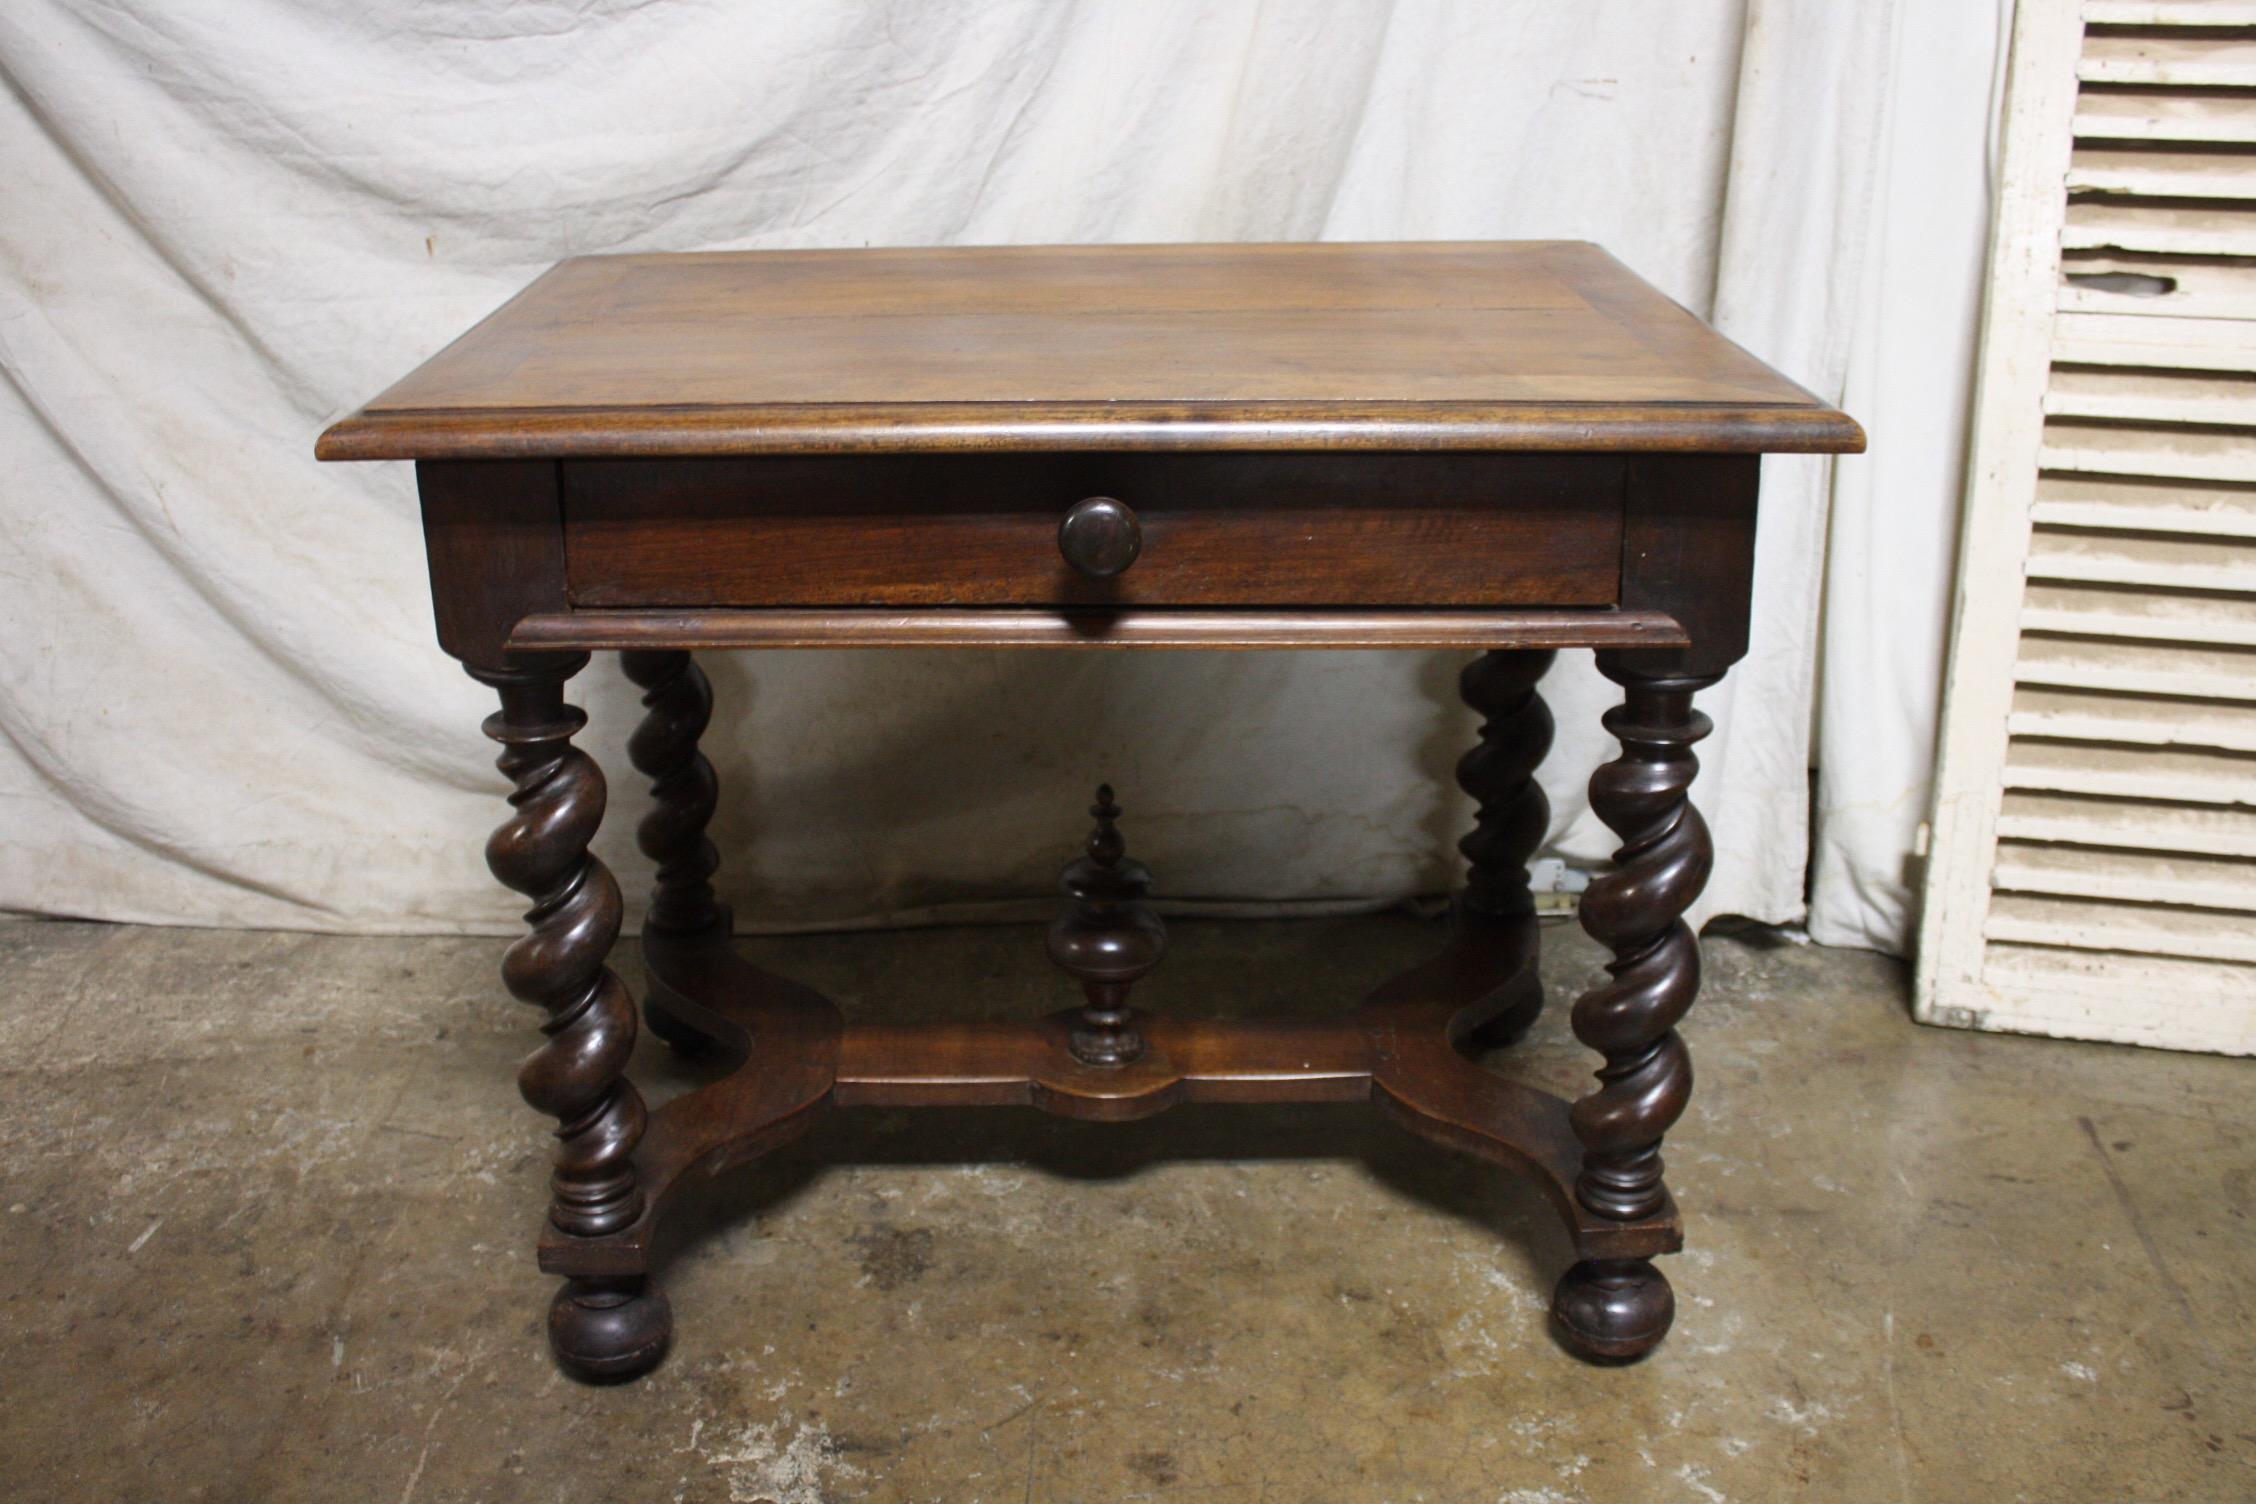 Nice size, can be used as a writing table or a side table.